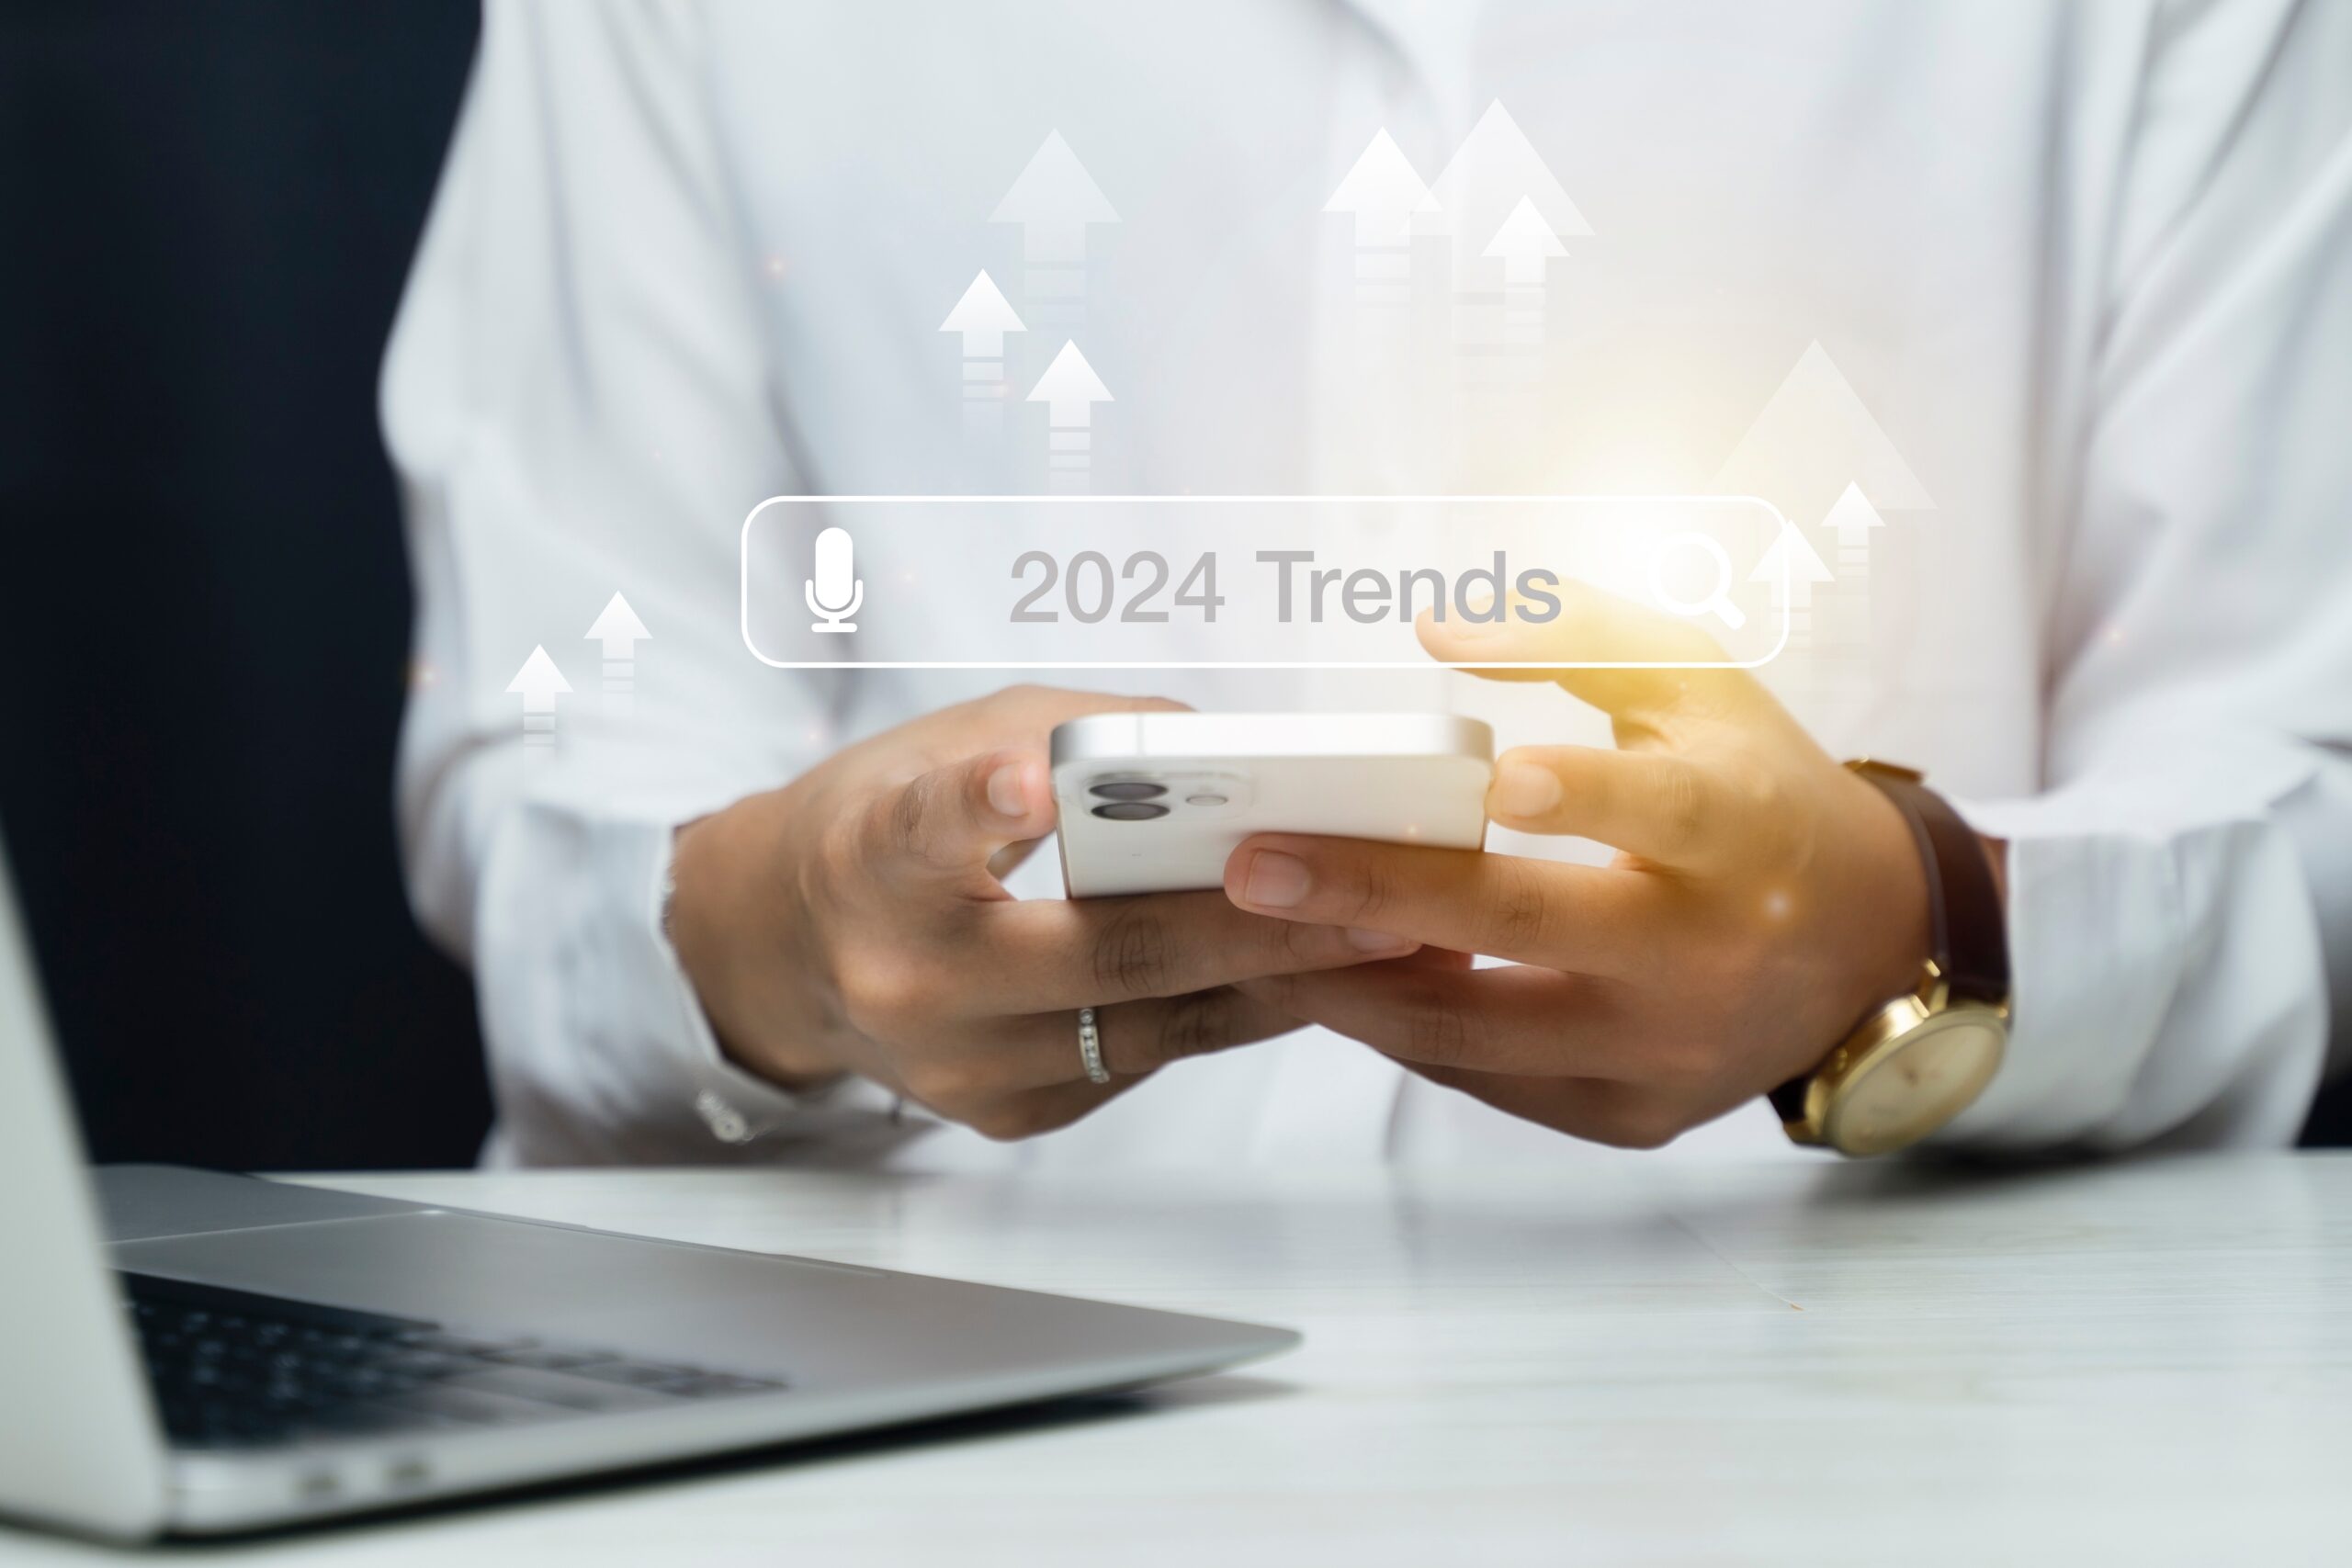 Digital Marketing Trends to Watch for in 2024